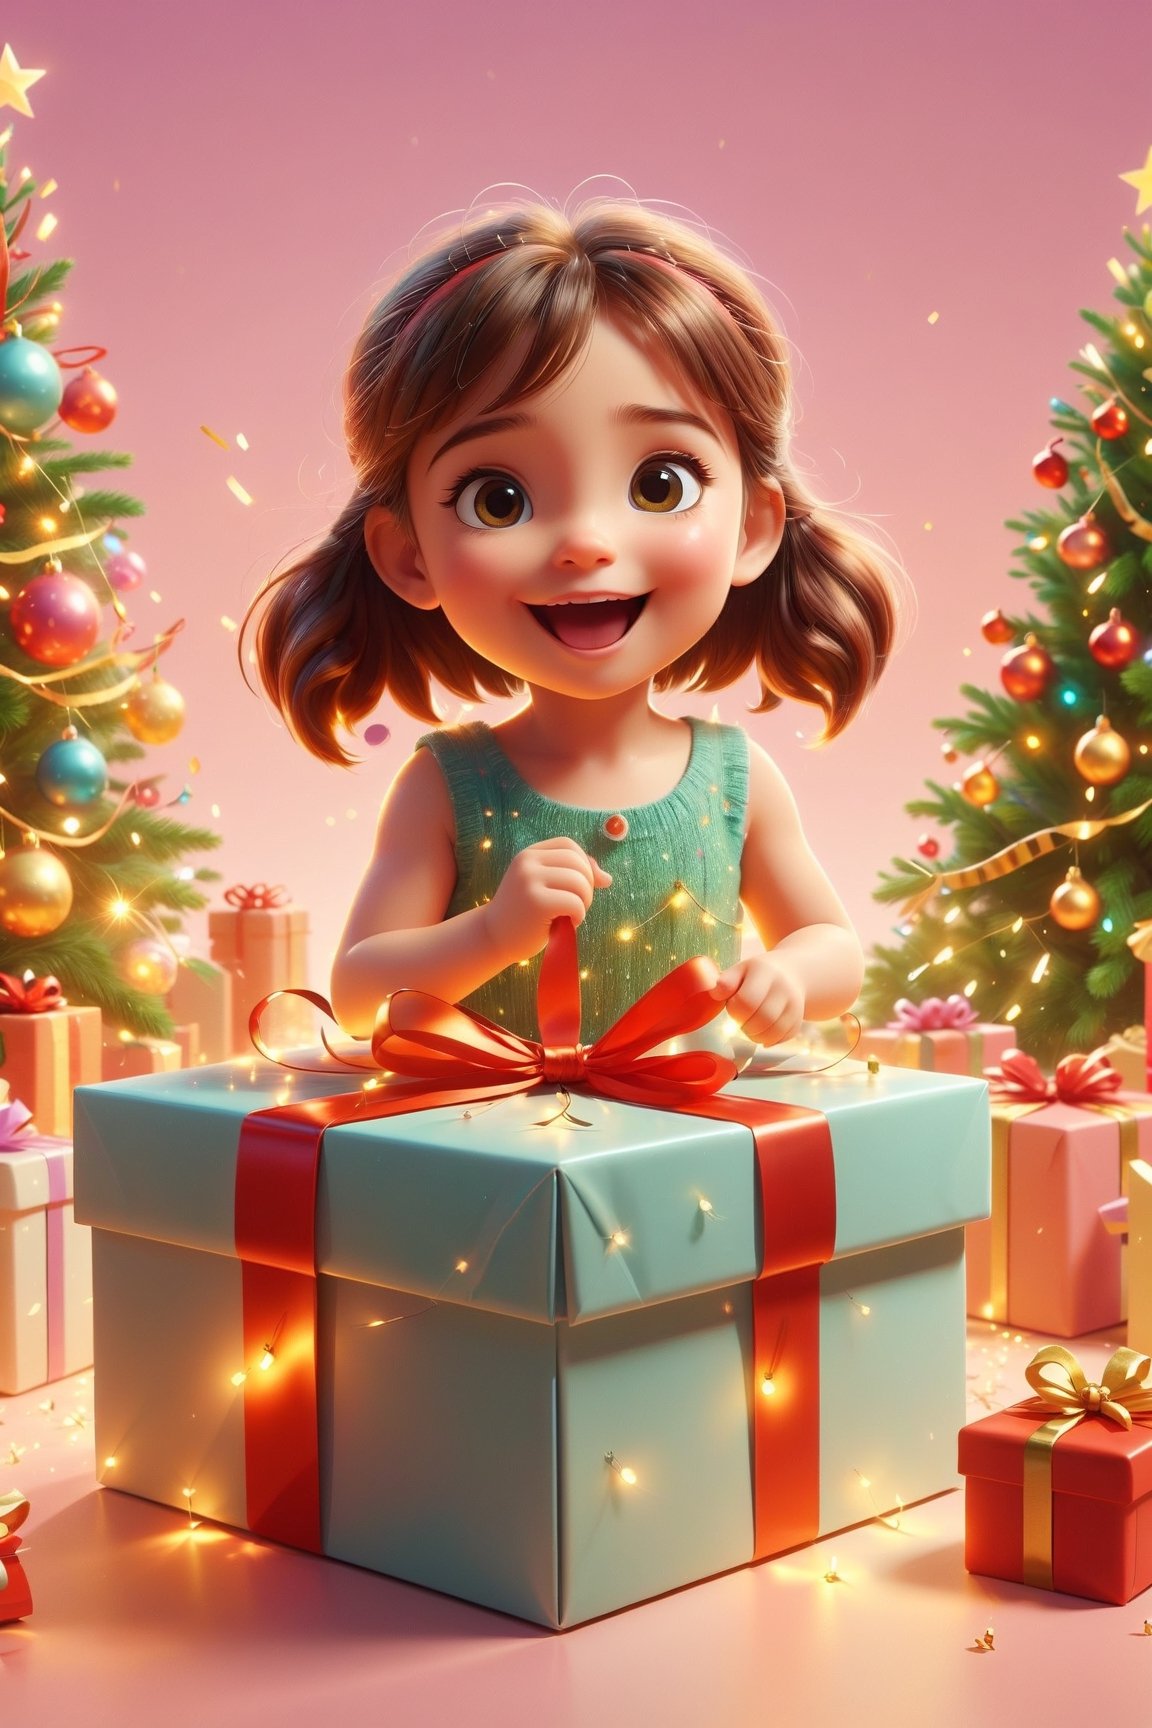 Create a scene with a tiny girl looking happy, excited, and surprised while opening a large gift box , ultra hd, realistic, vivid colors, highly detailed, christmas theme, pastel colors